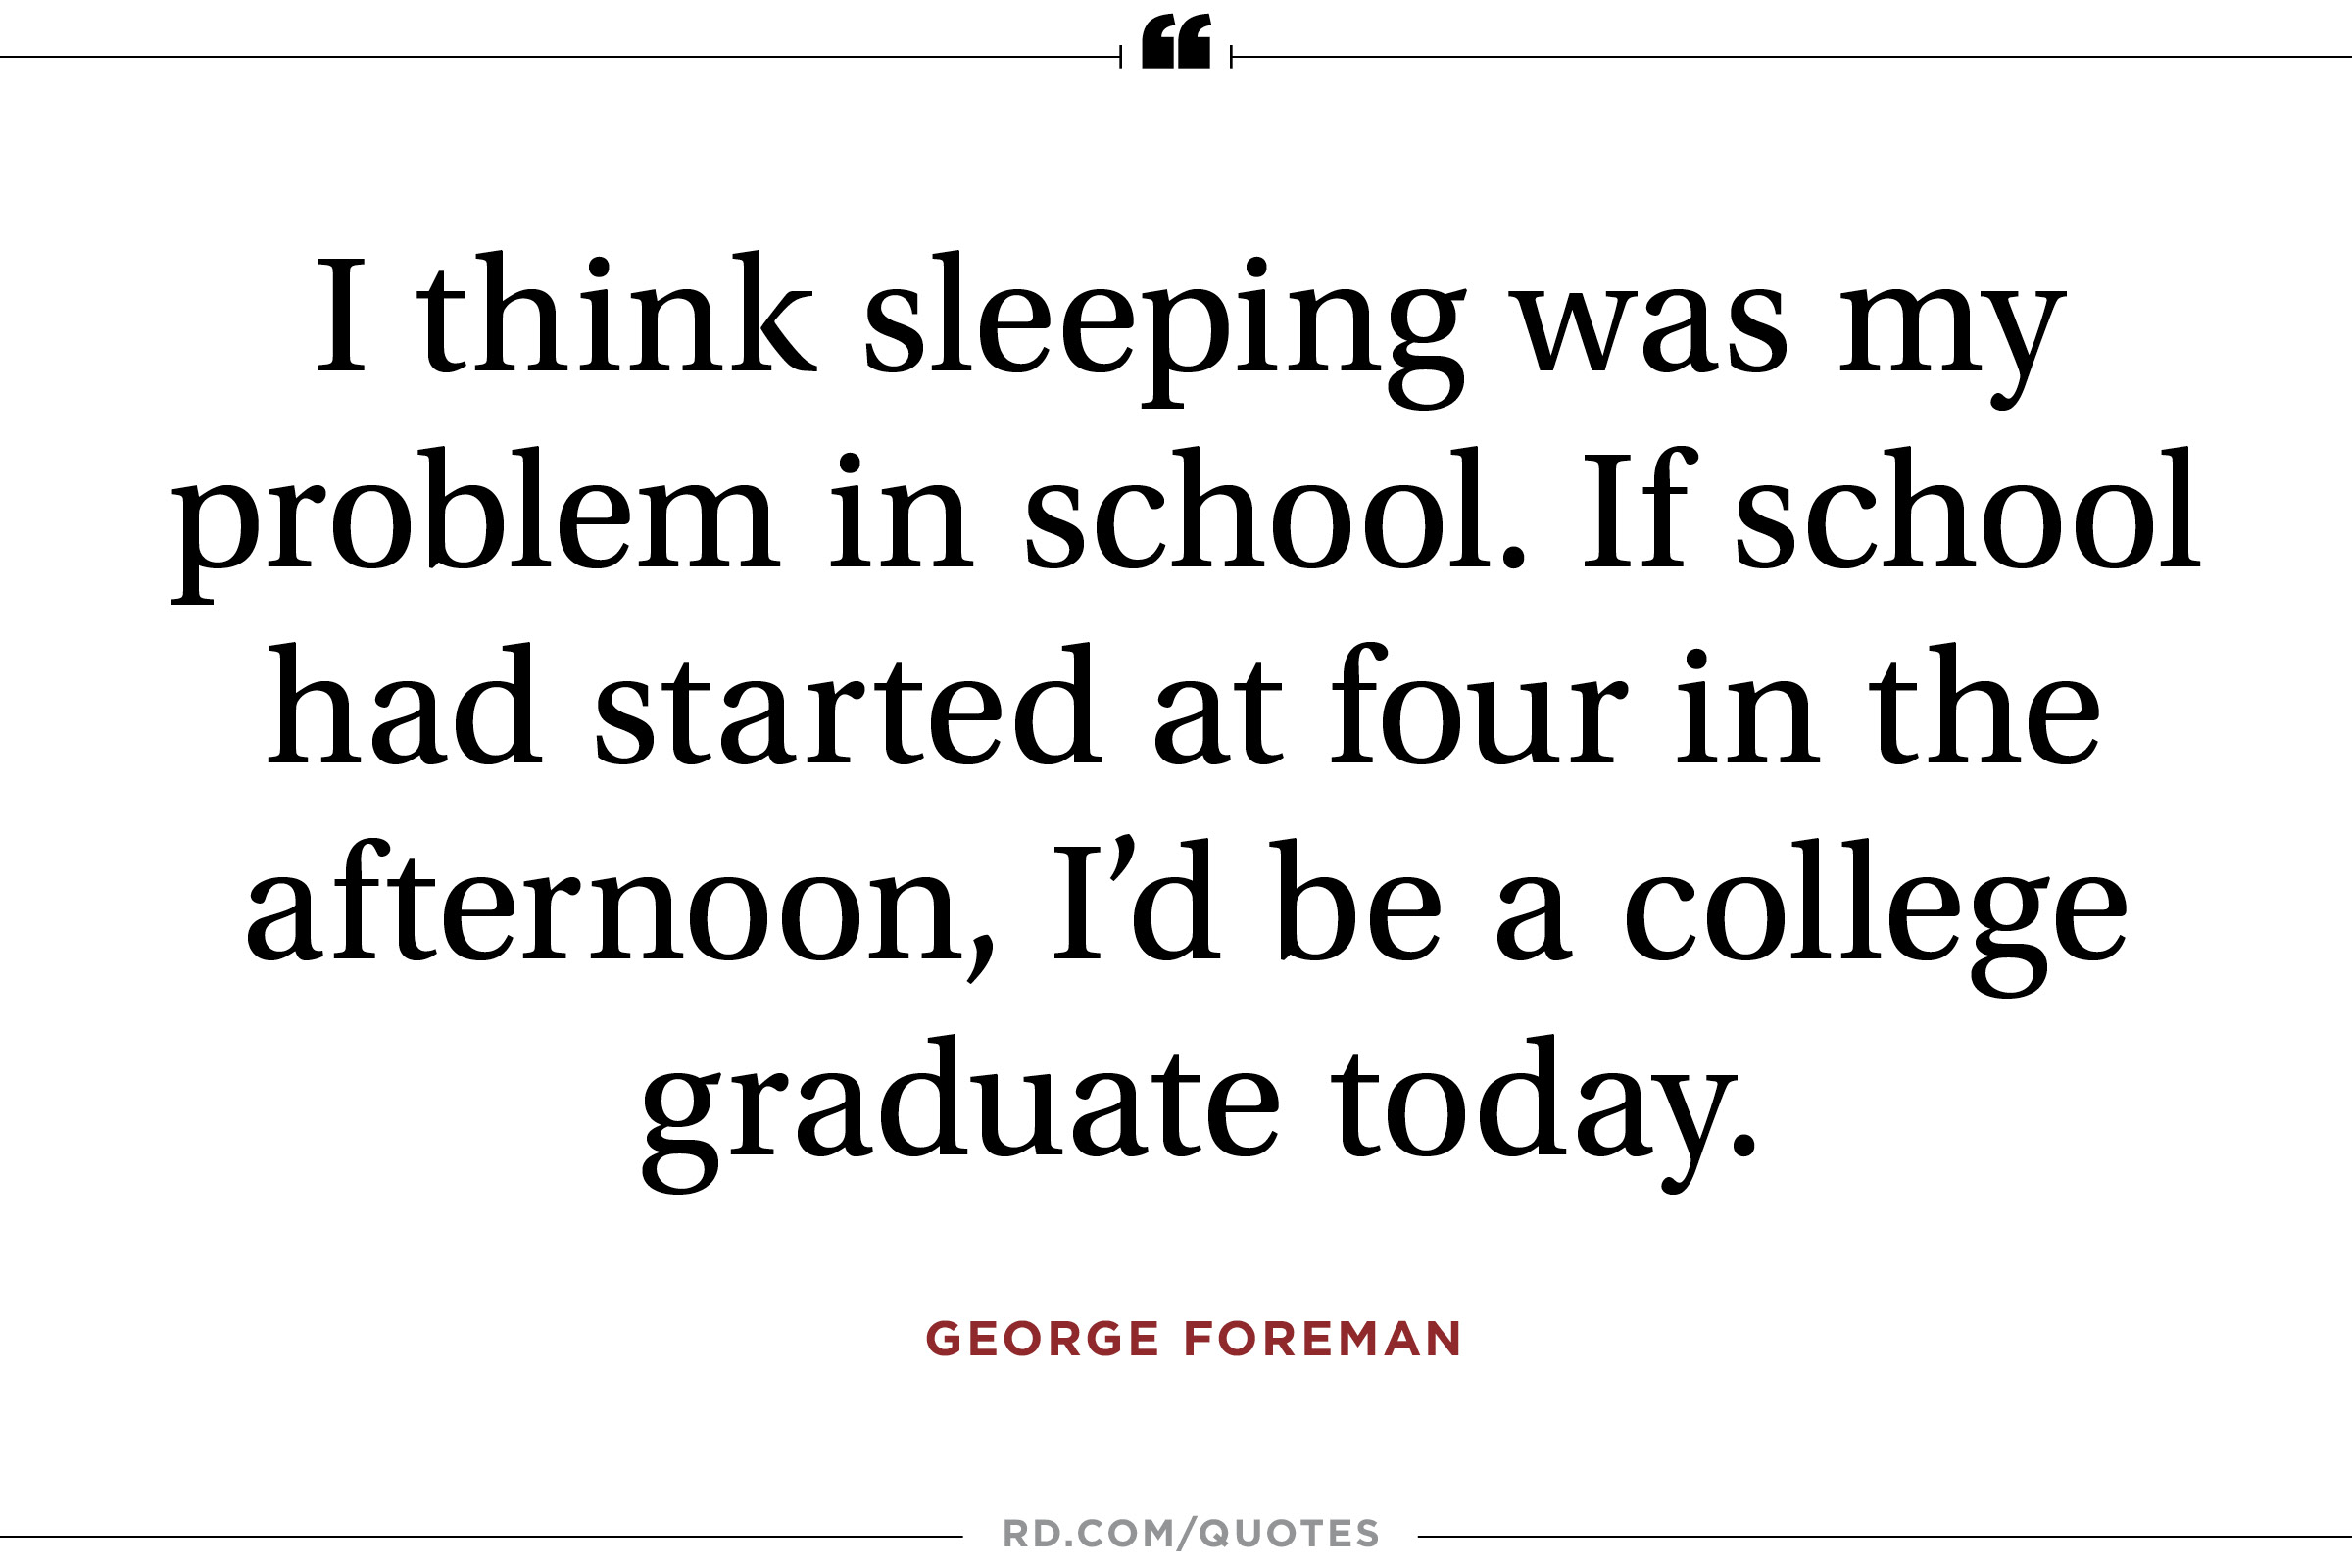 I think sleeping was my problem in school. If school had started at four in the afternoon, I’d be a college graduate today. George Foreman